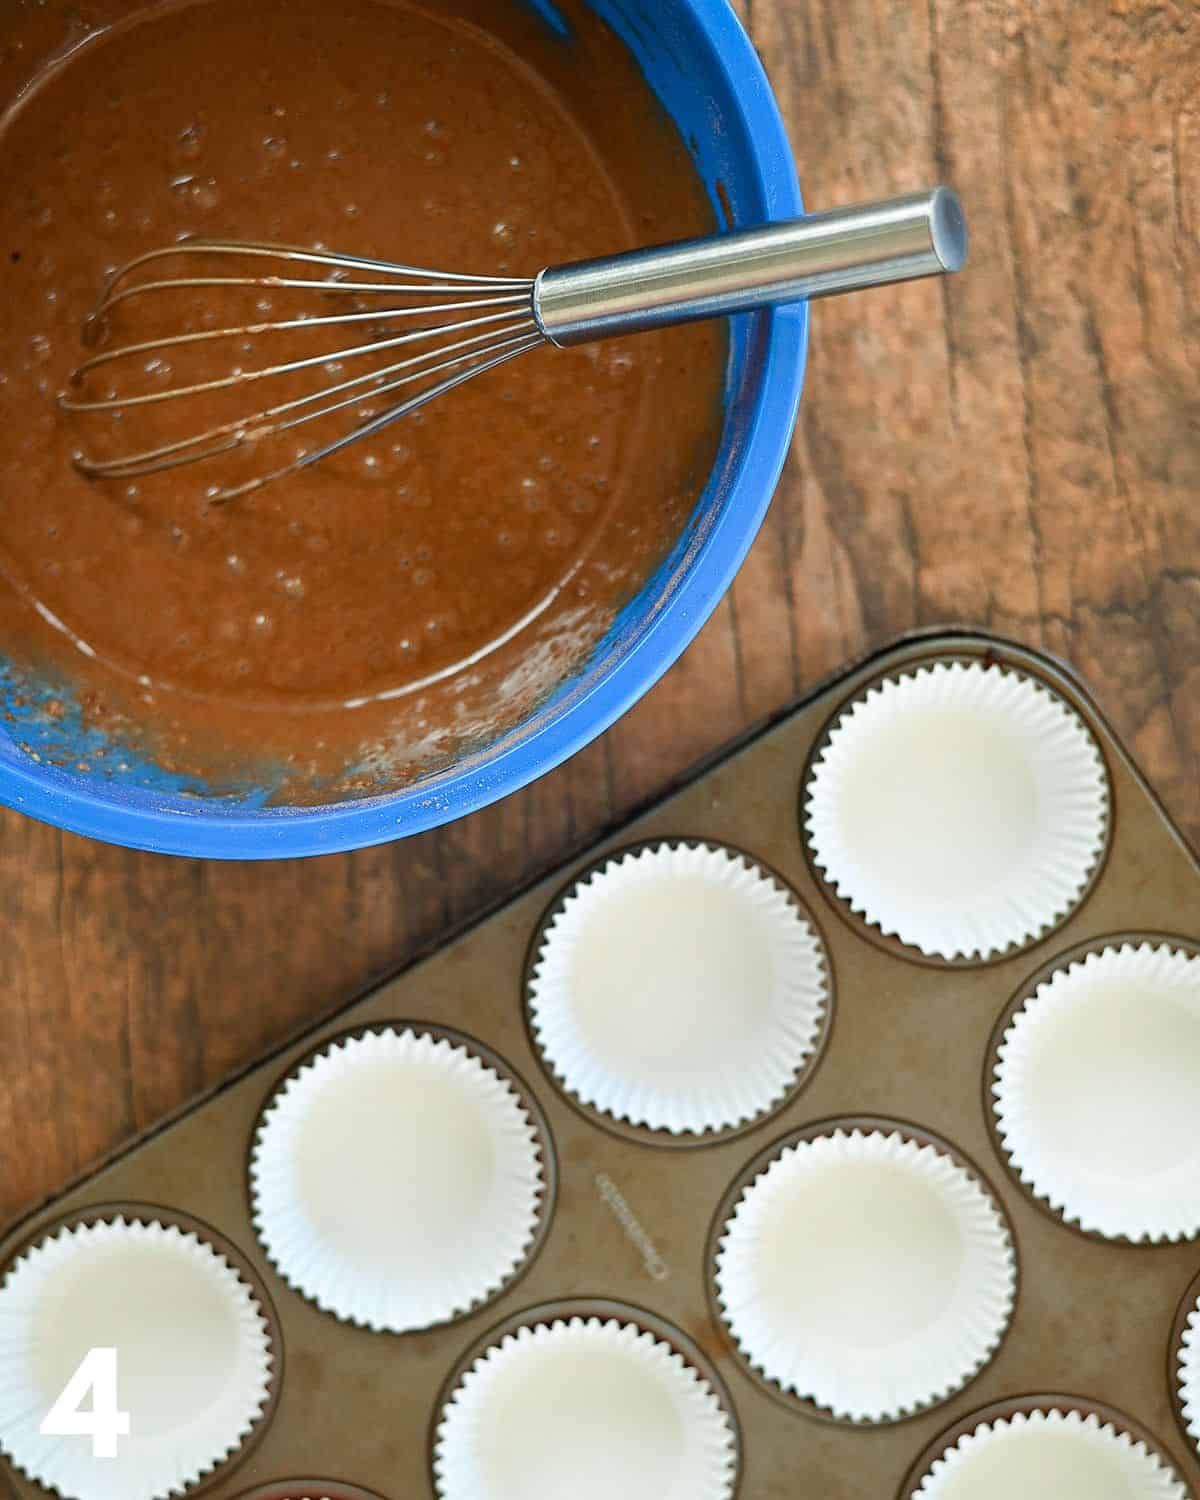 Chocolate pancake batter in a bowl next to a muffin tin.